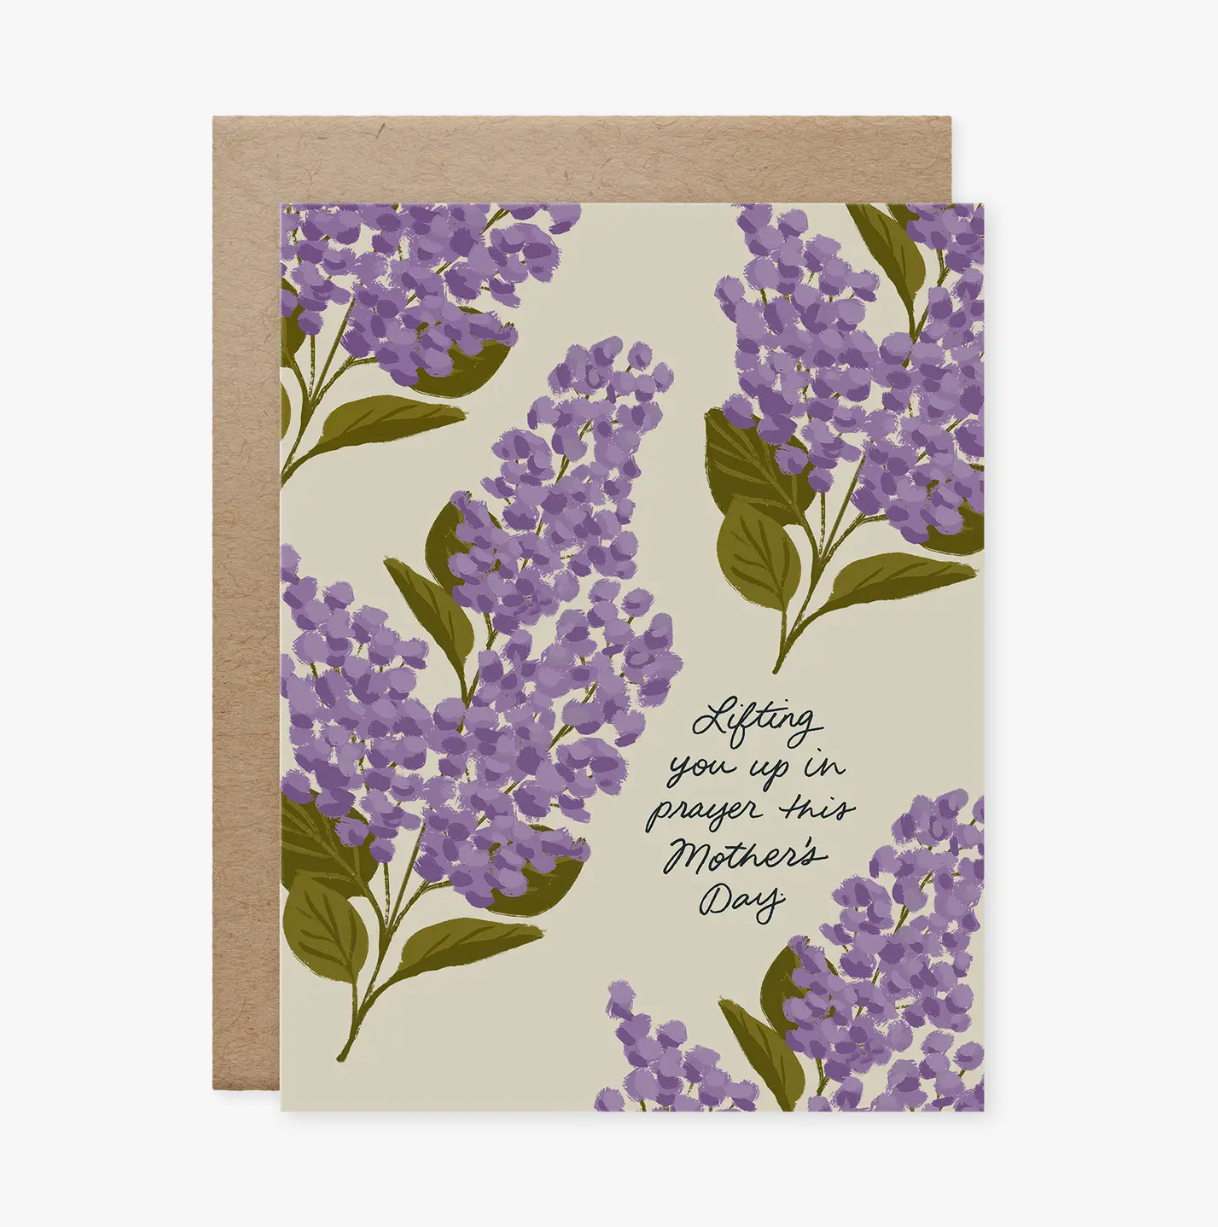 Lifting You Up in Prayer This Mother's Day Card